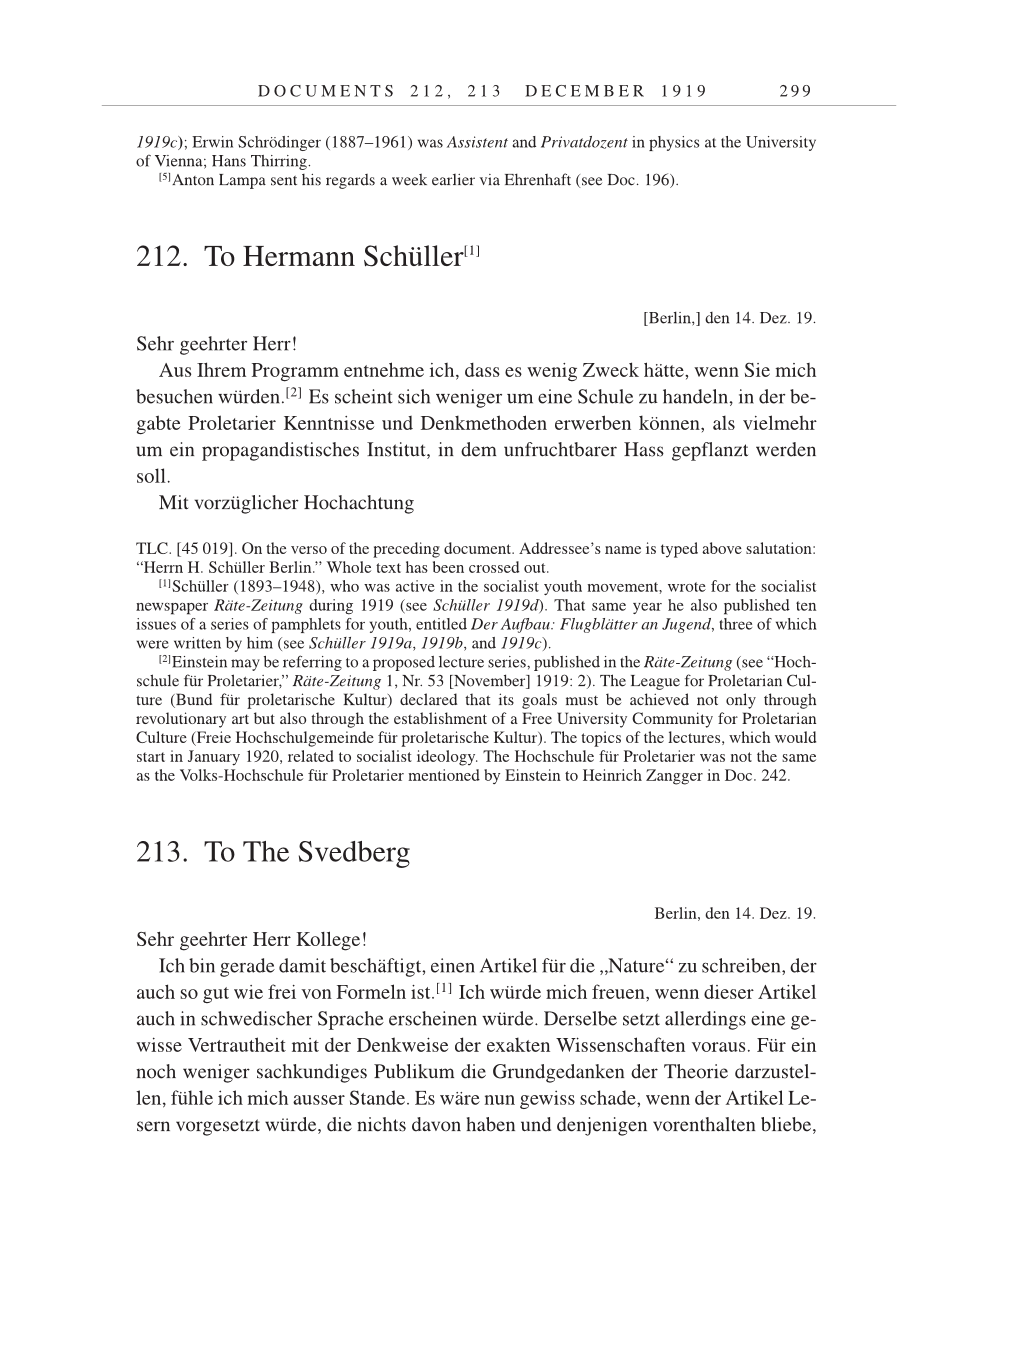 Volume 9: The Berlin Years: Correspondence January 1919-April 1920 page 299